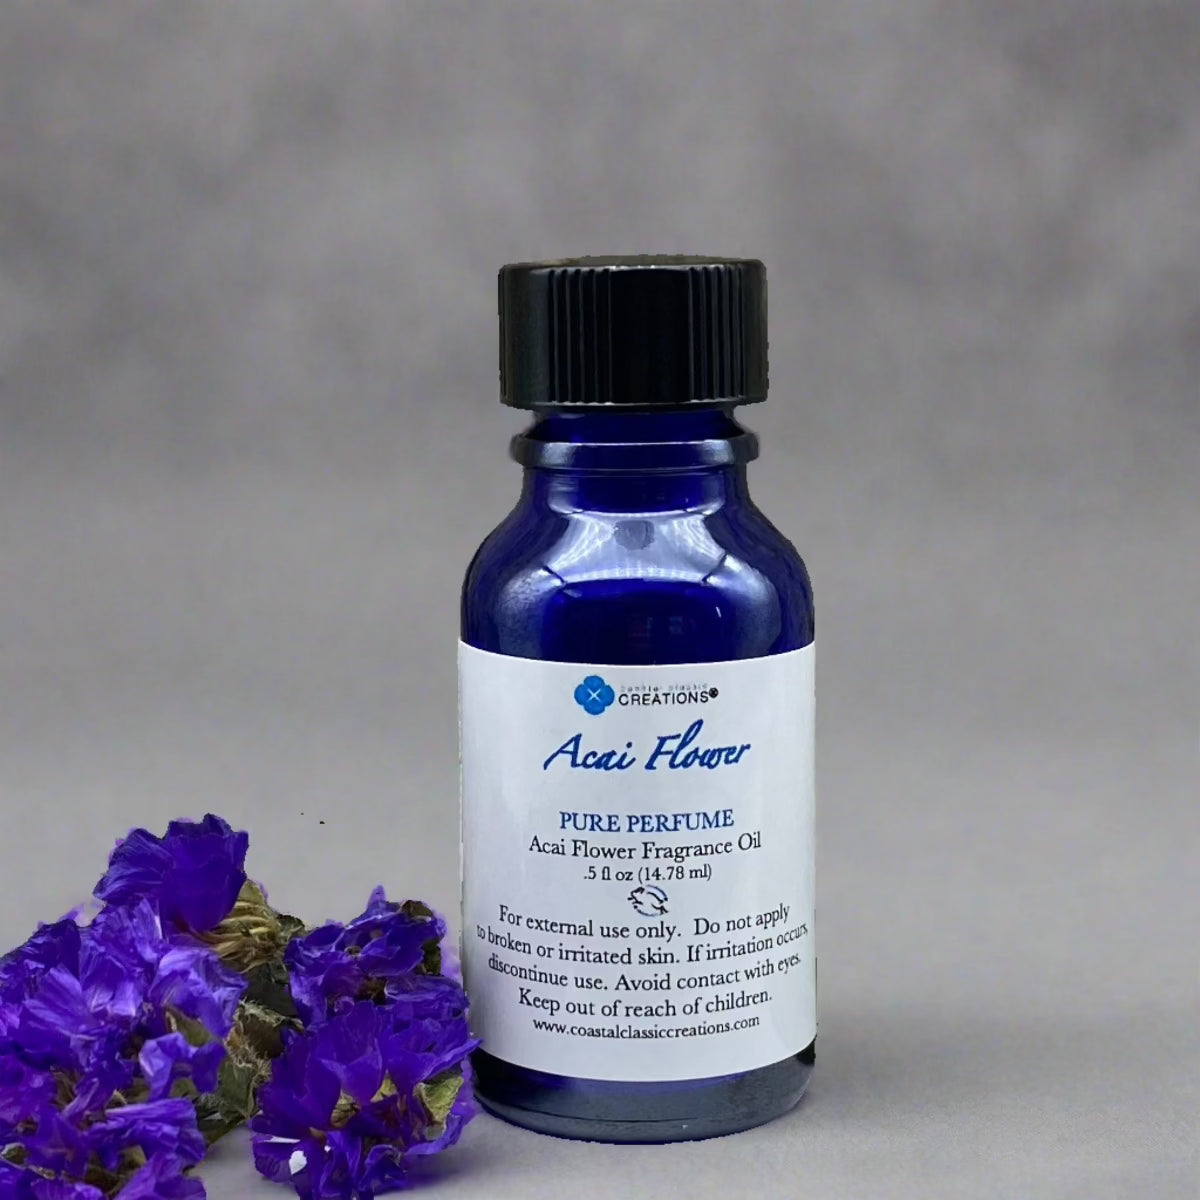 Half-ounce blue bottle of Acai Flower Perfume with a black cap and labeled with the product name and ingredients